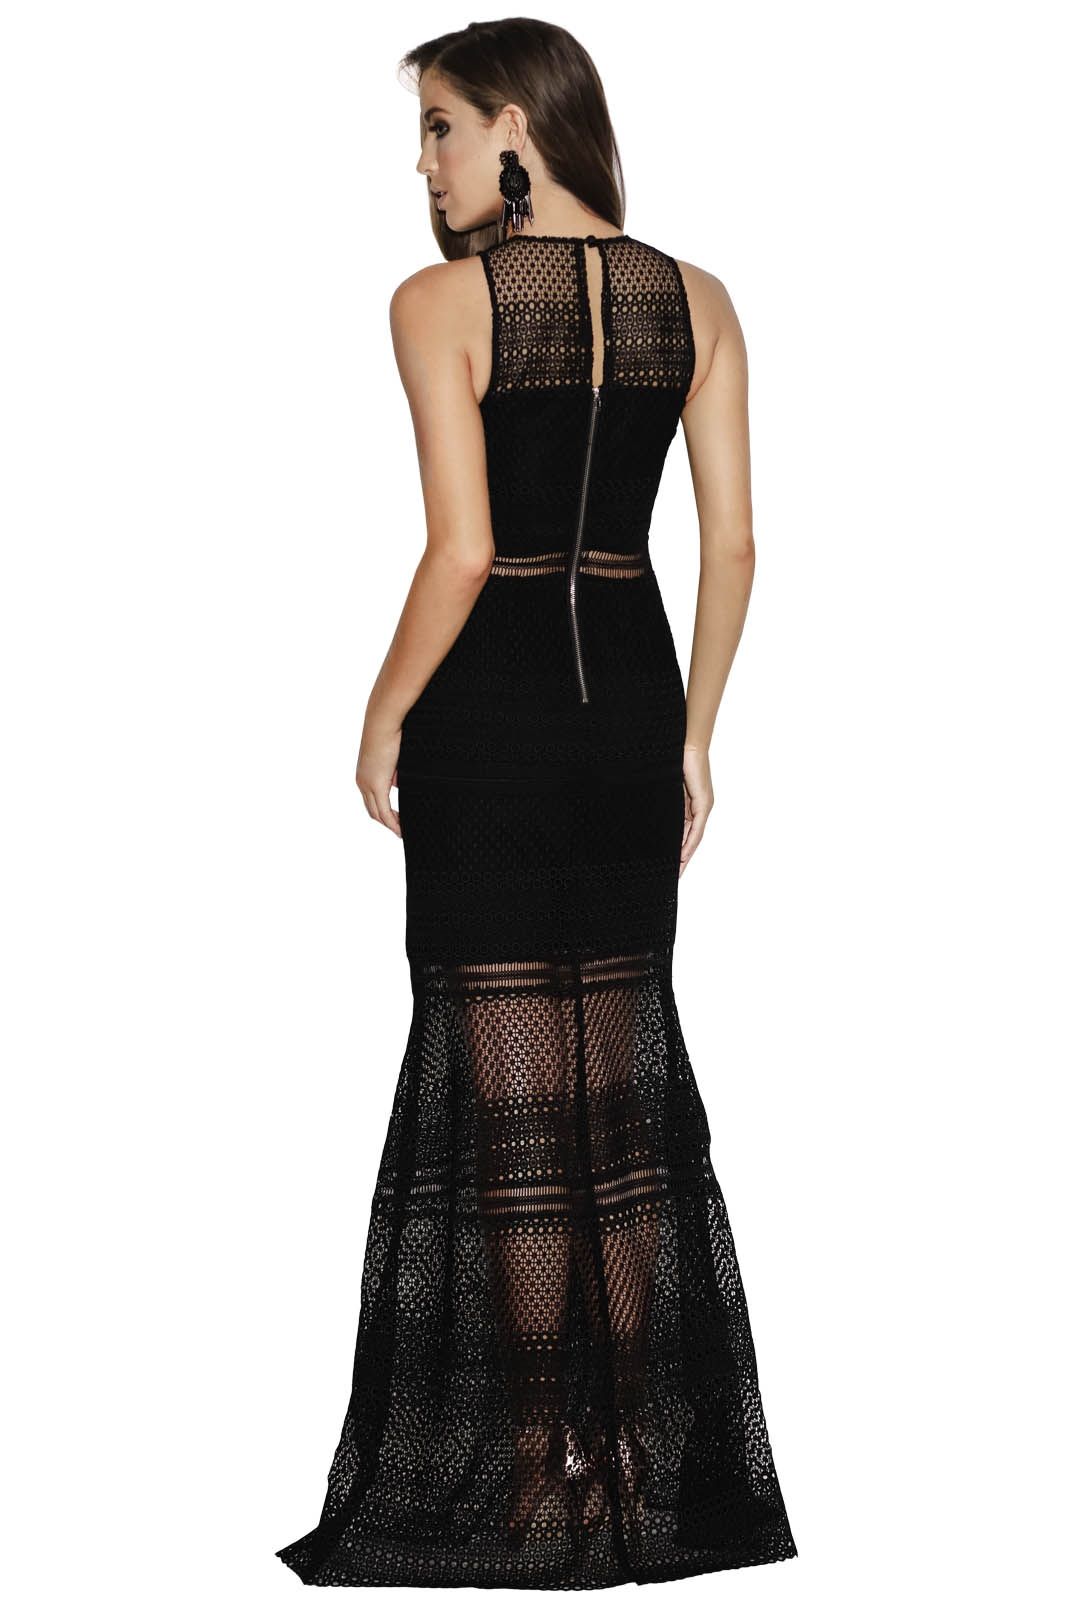 Grace and Hart - Show Me Up Gown - Black - Back